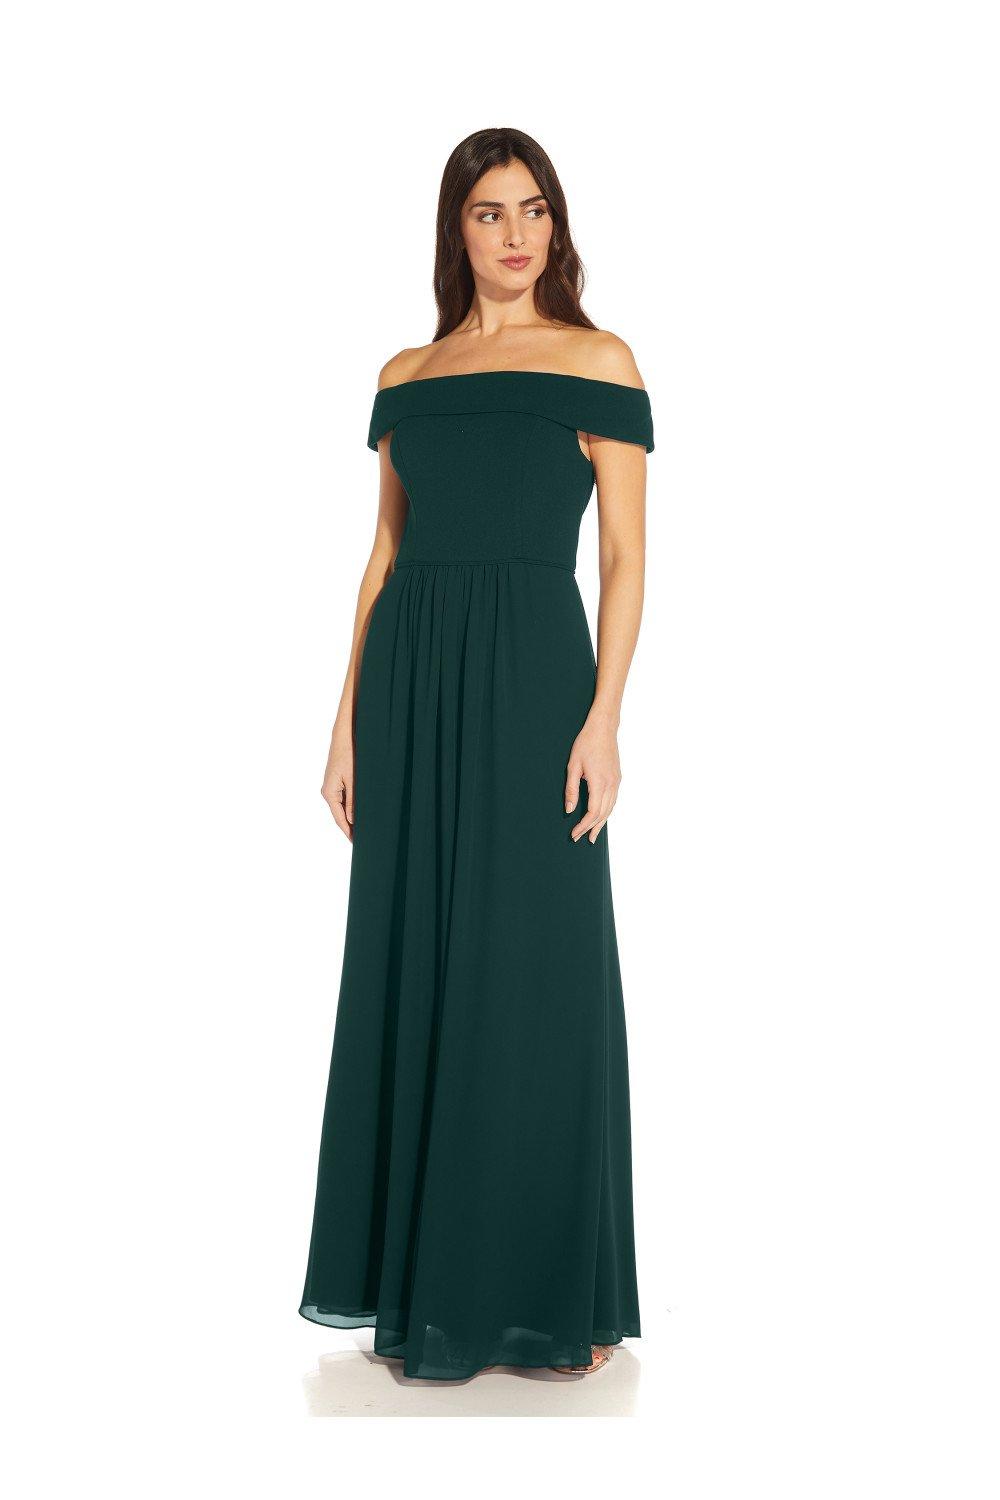 crepe chiffon gown